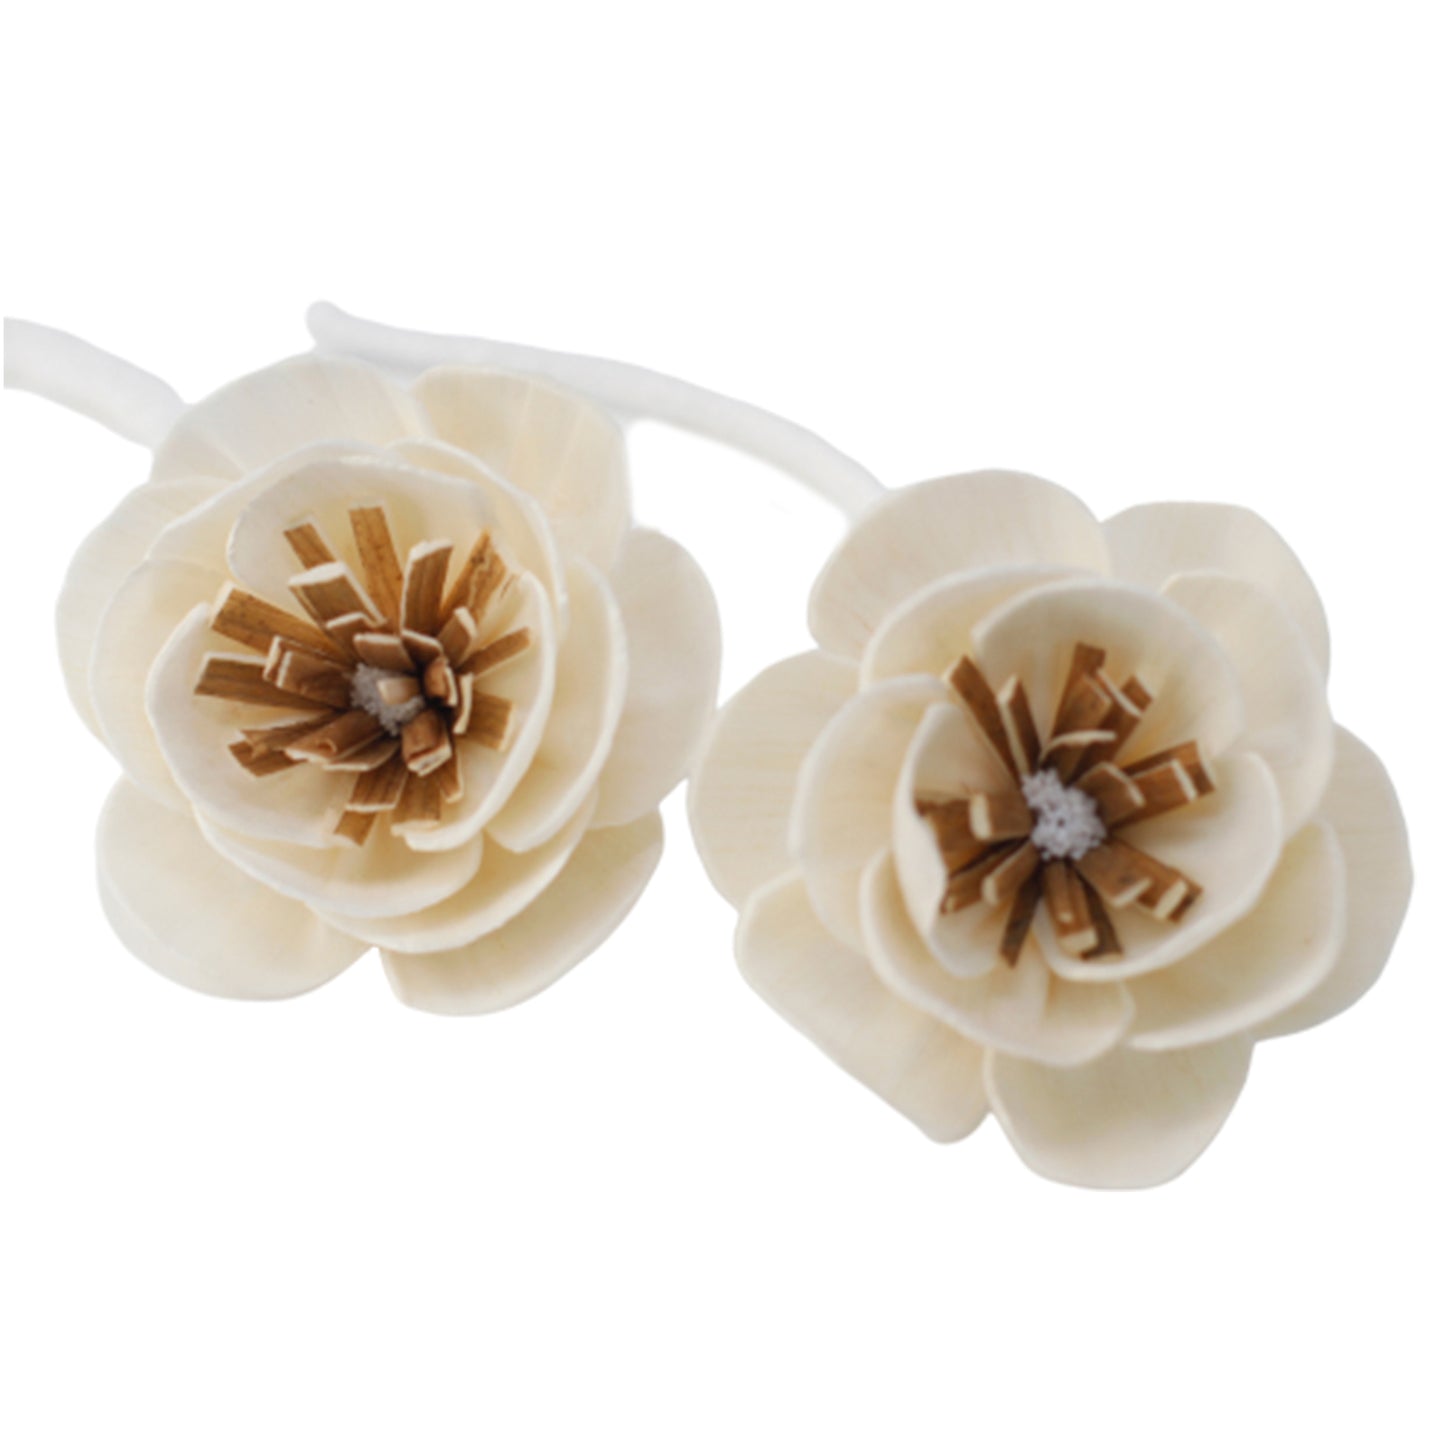 Natural Diffuser Flowers - Small Poppy on String